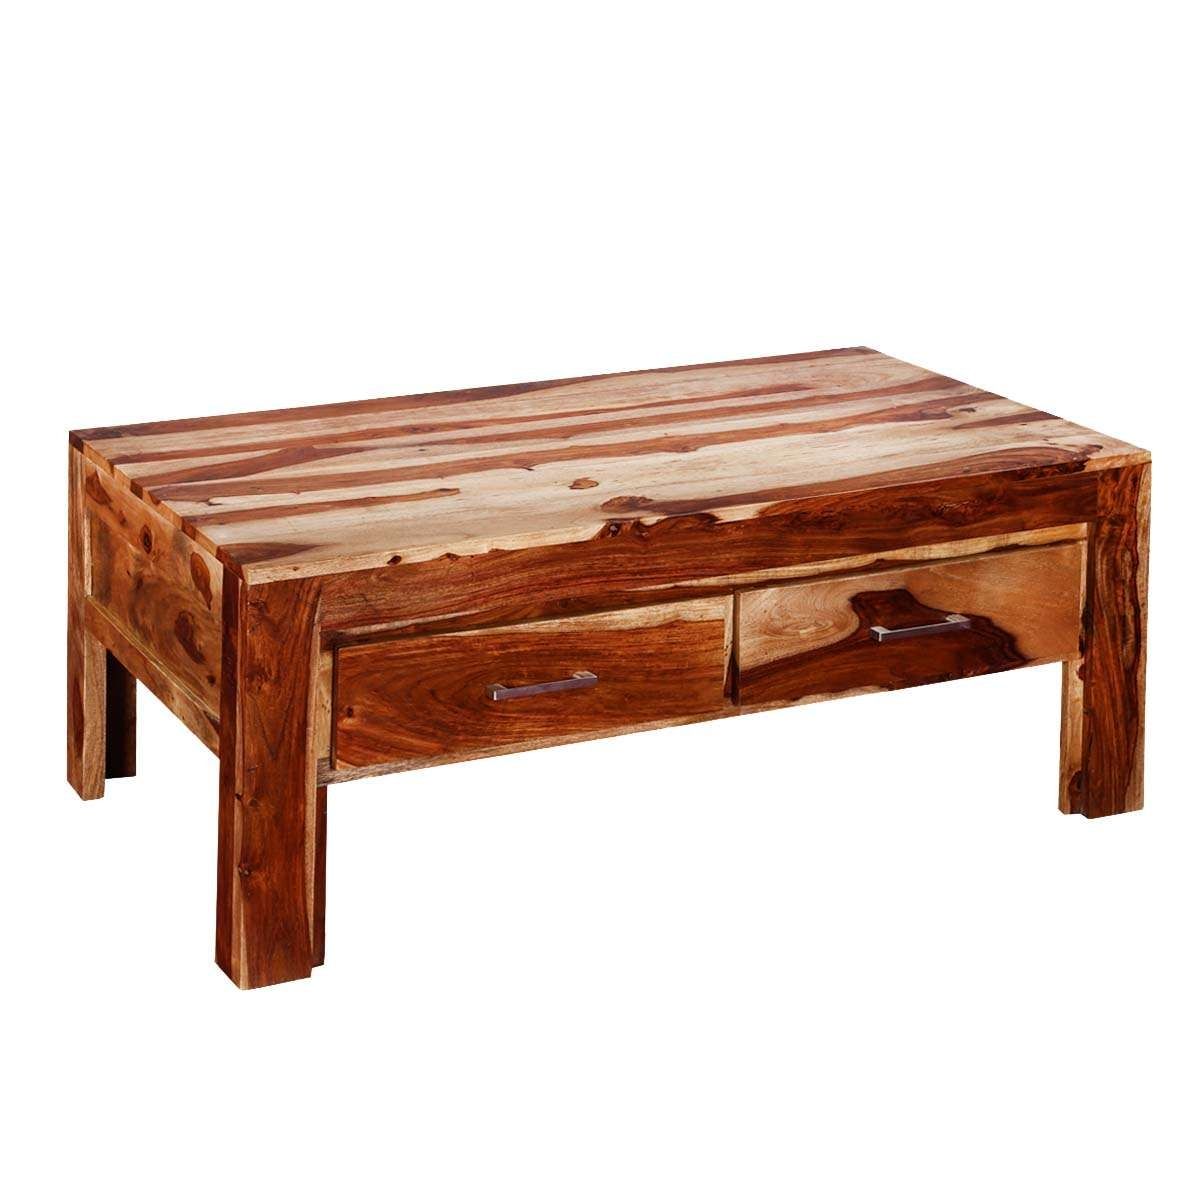 Frontier Indian Rosewood 45” Coffee Table W Drawers For Current Indian Coffee Tables (View 10 of 20)